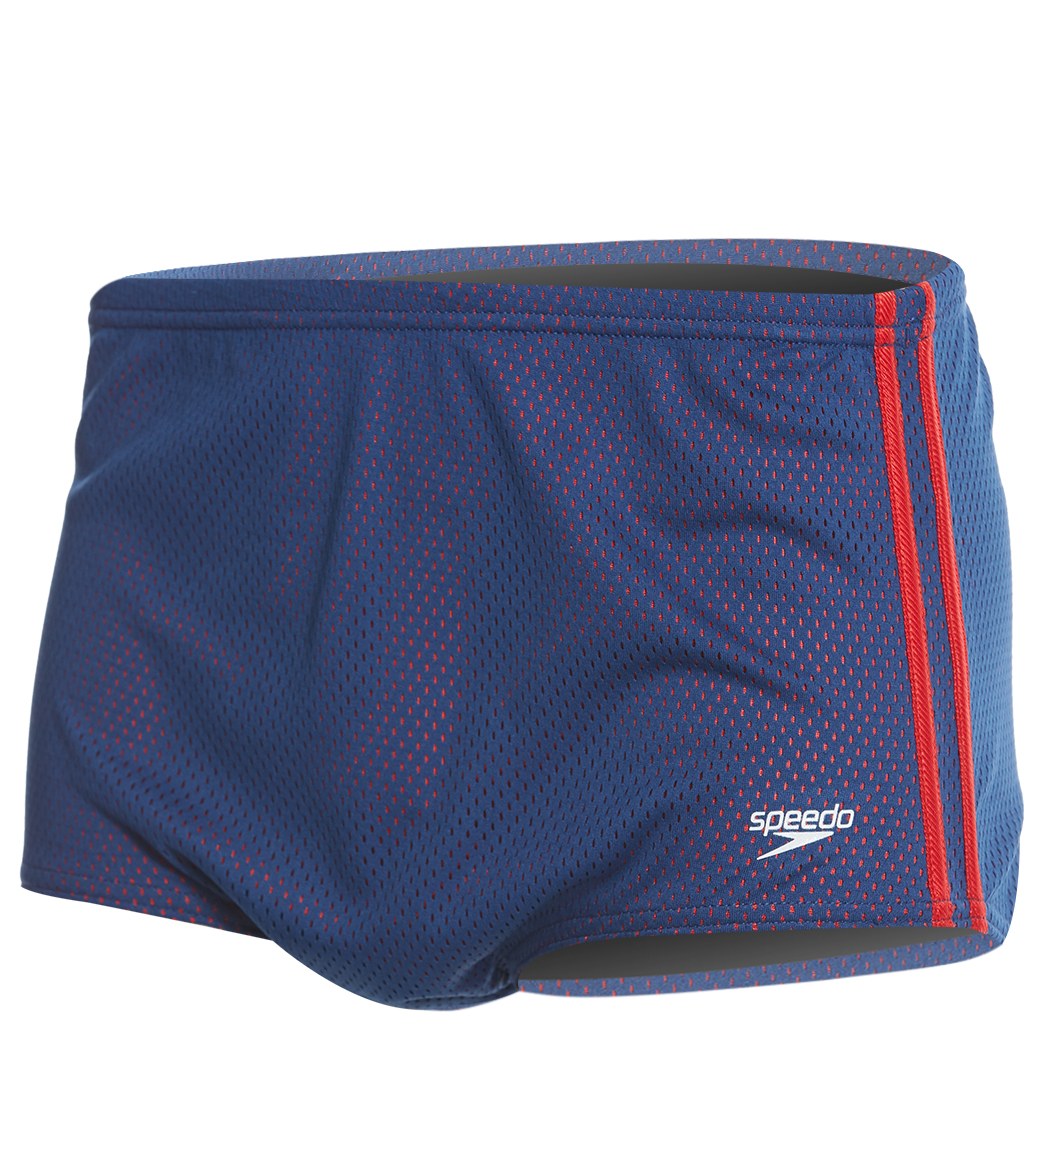 Speedo Solid Poly Mesh Square Leg Swimsuit - Navy/Red 26 Polyester - Swimoutlet.com